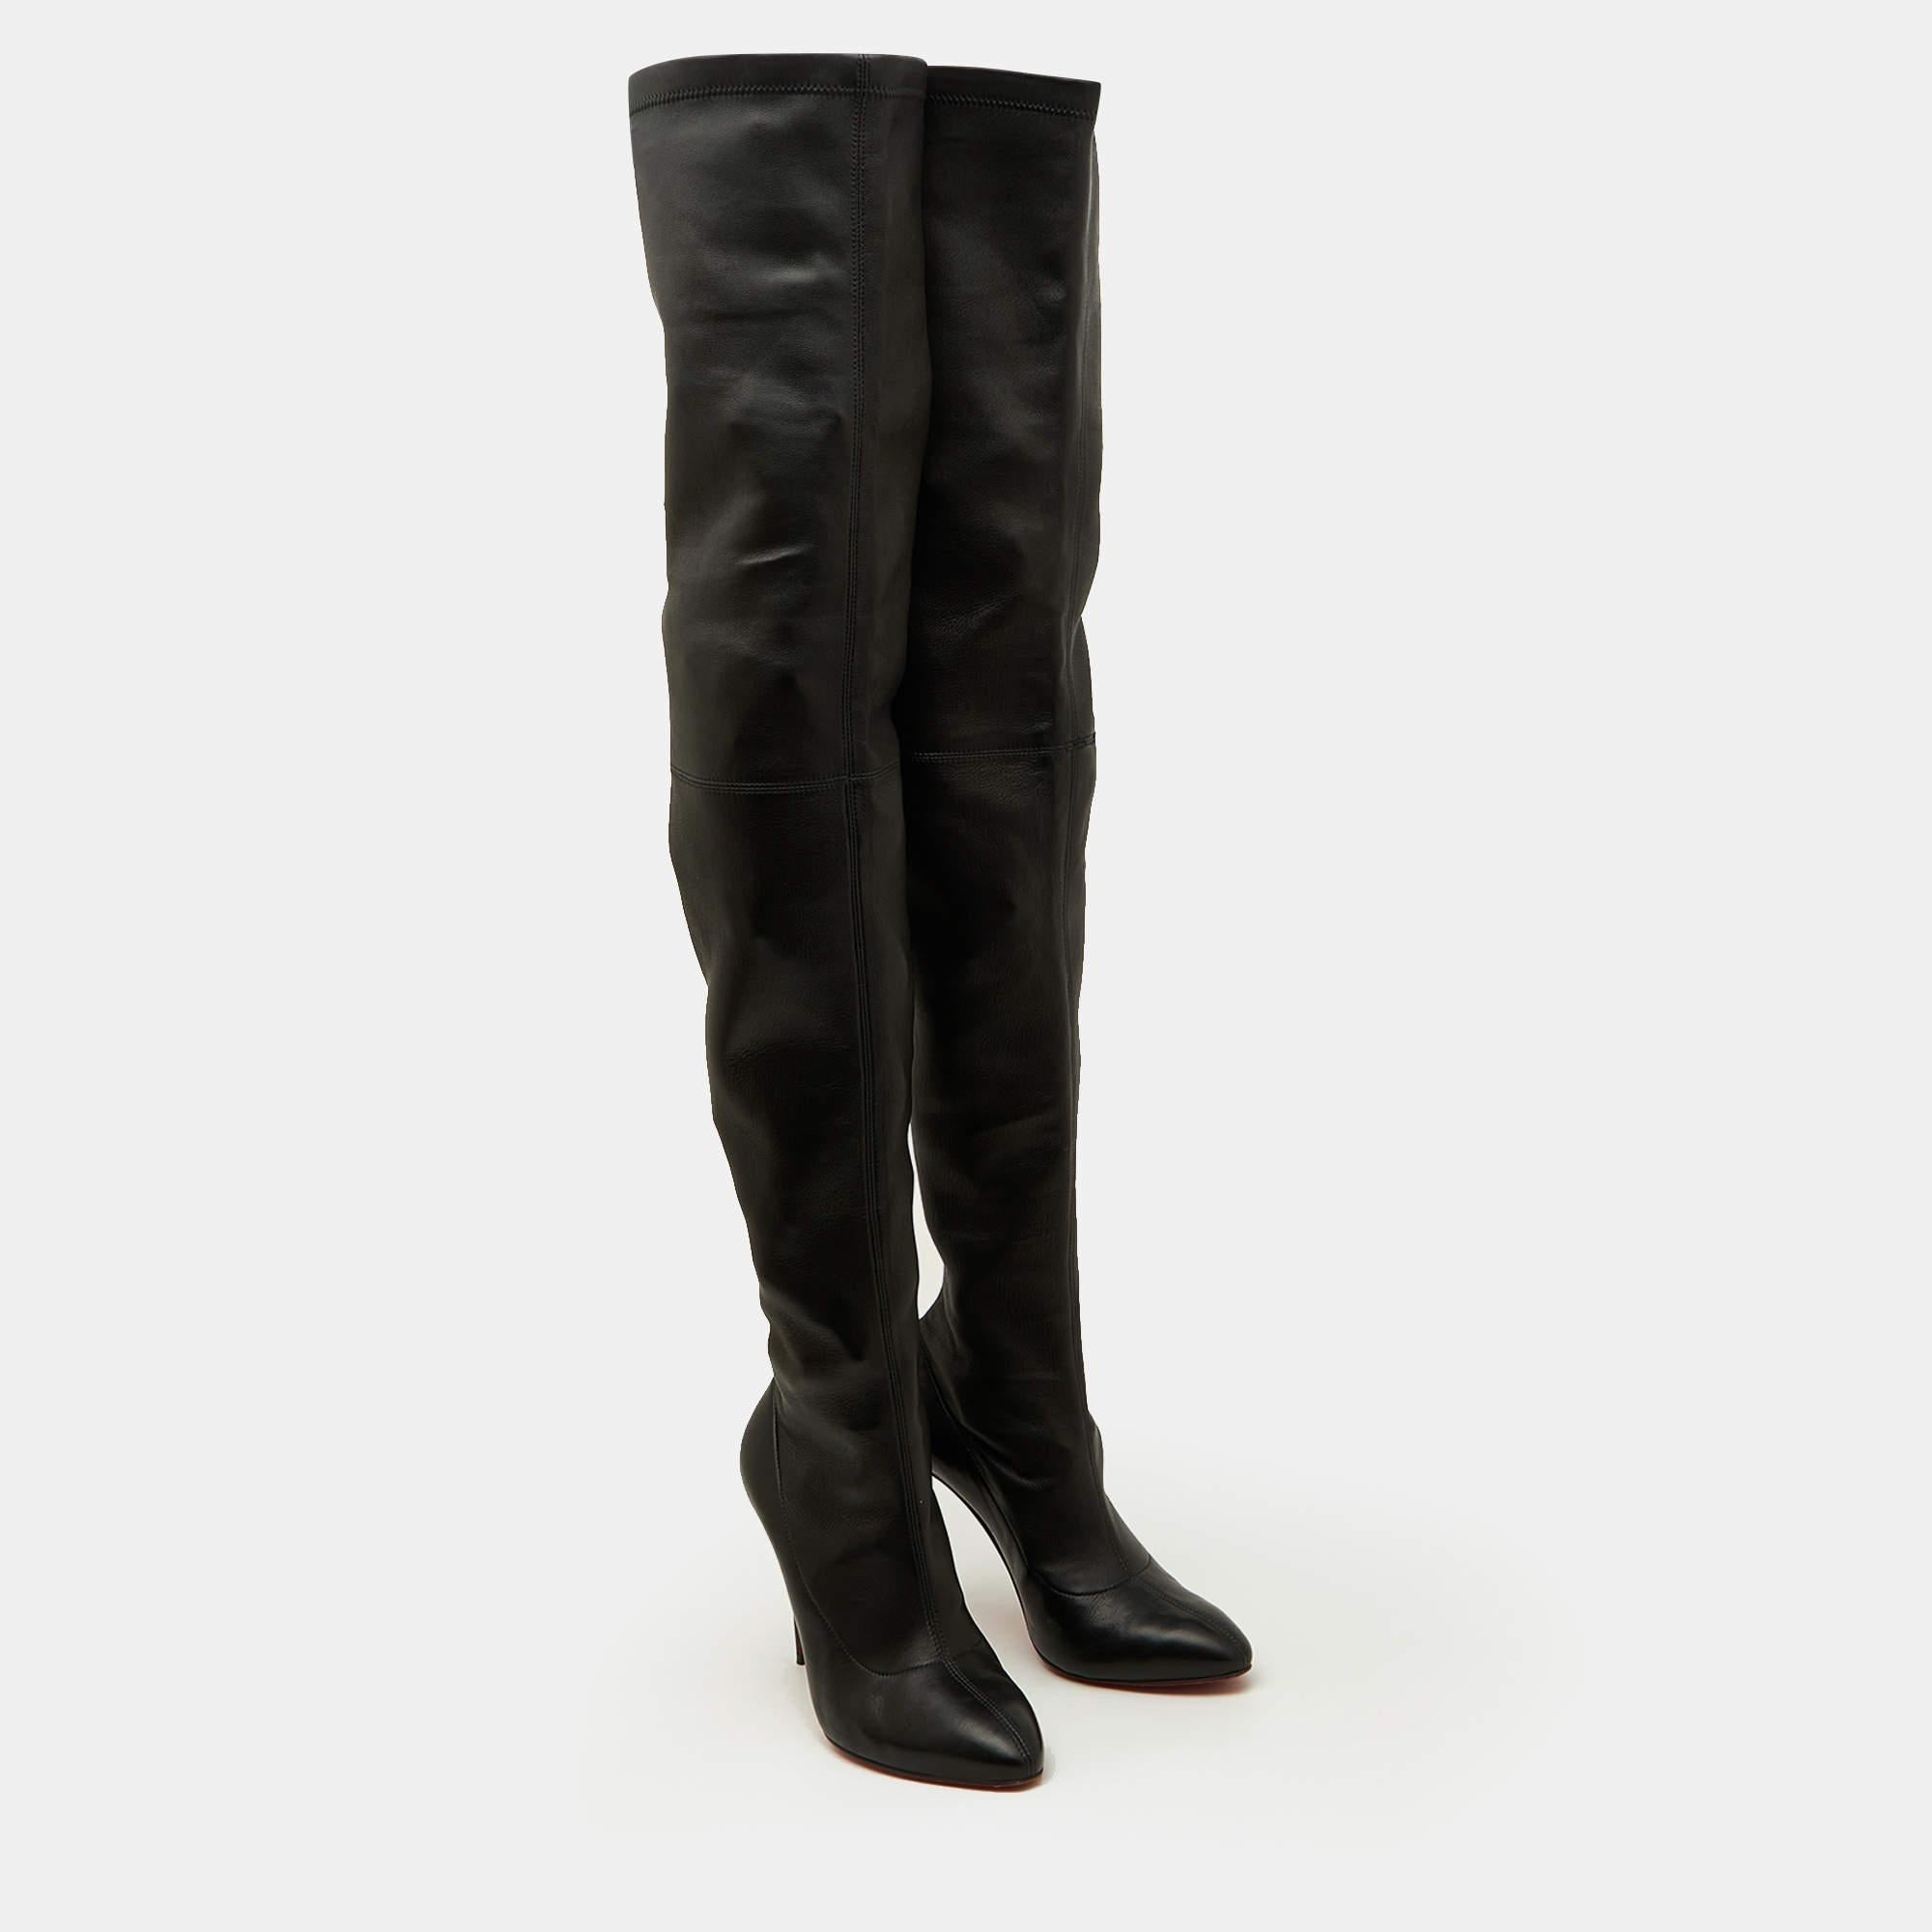 Christian Louboutin Black Leather Thigh High Boots Size 38 5